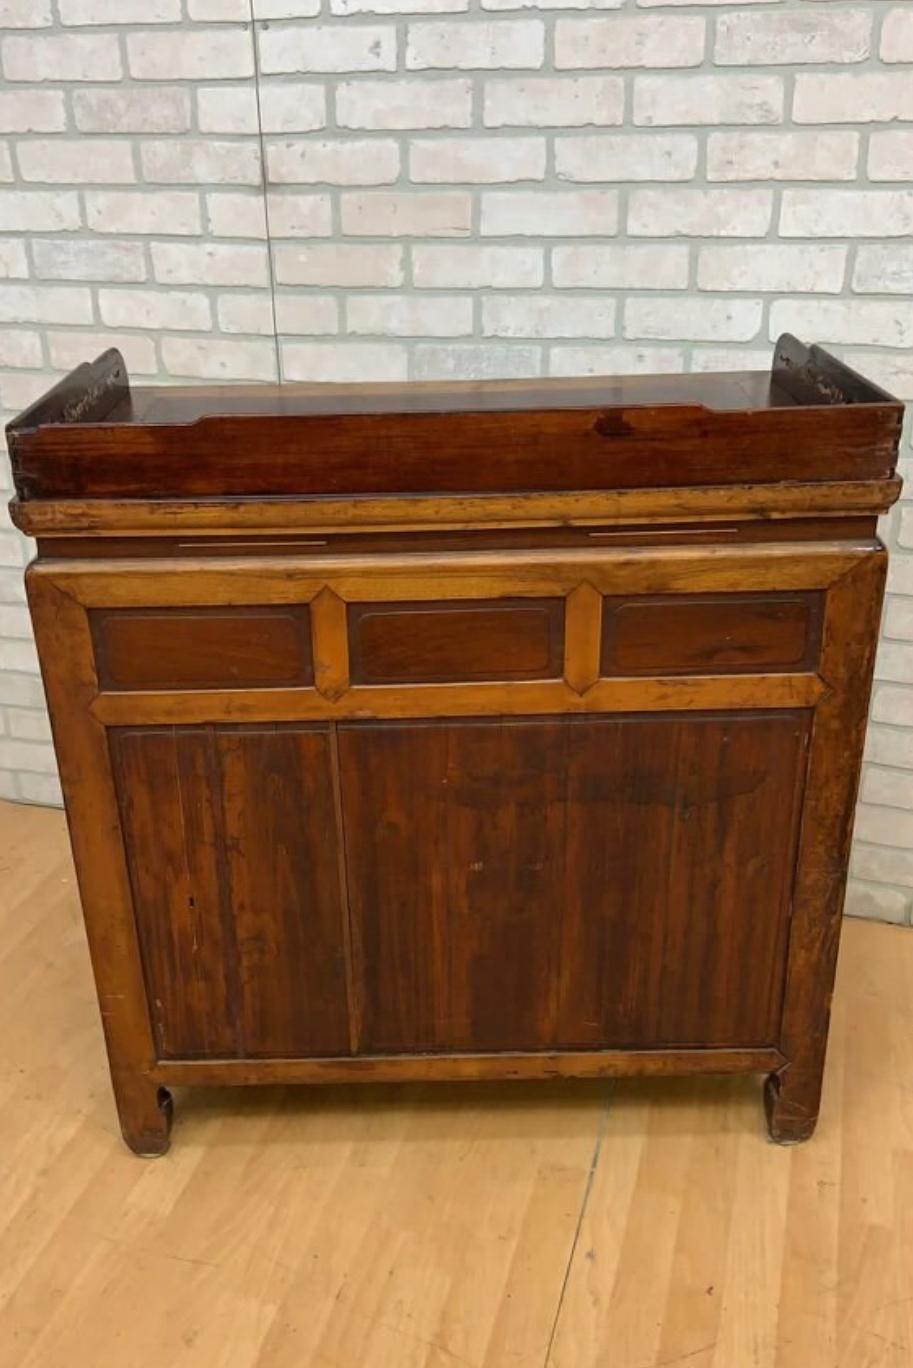 Antique Chinese Jiangsu Province Rosewood with Bone Inlay Sideboard Cabinet For Sale 4